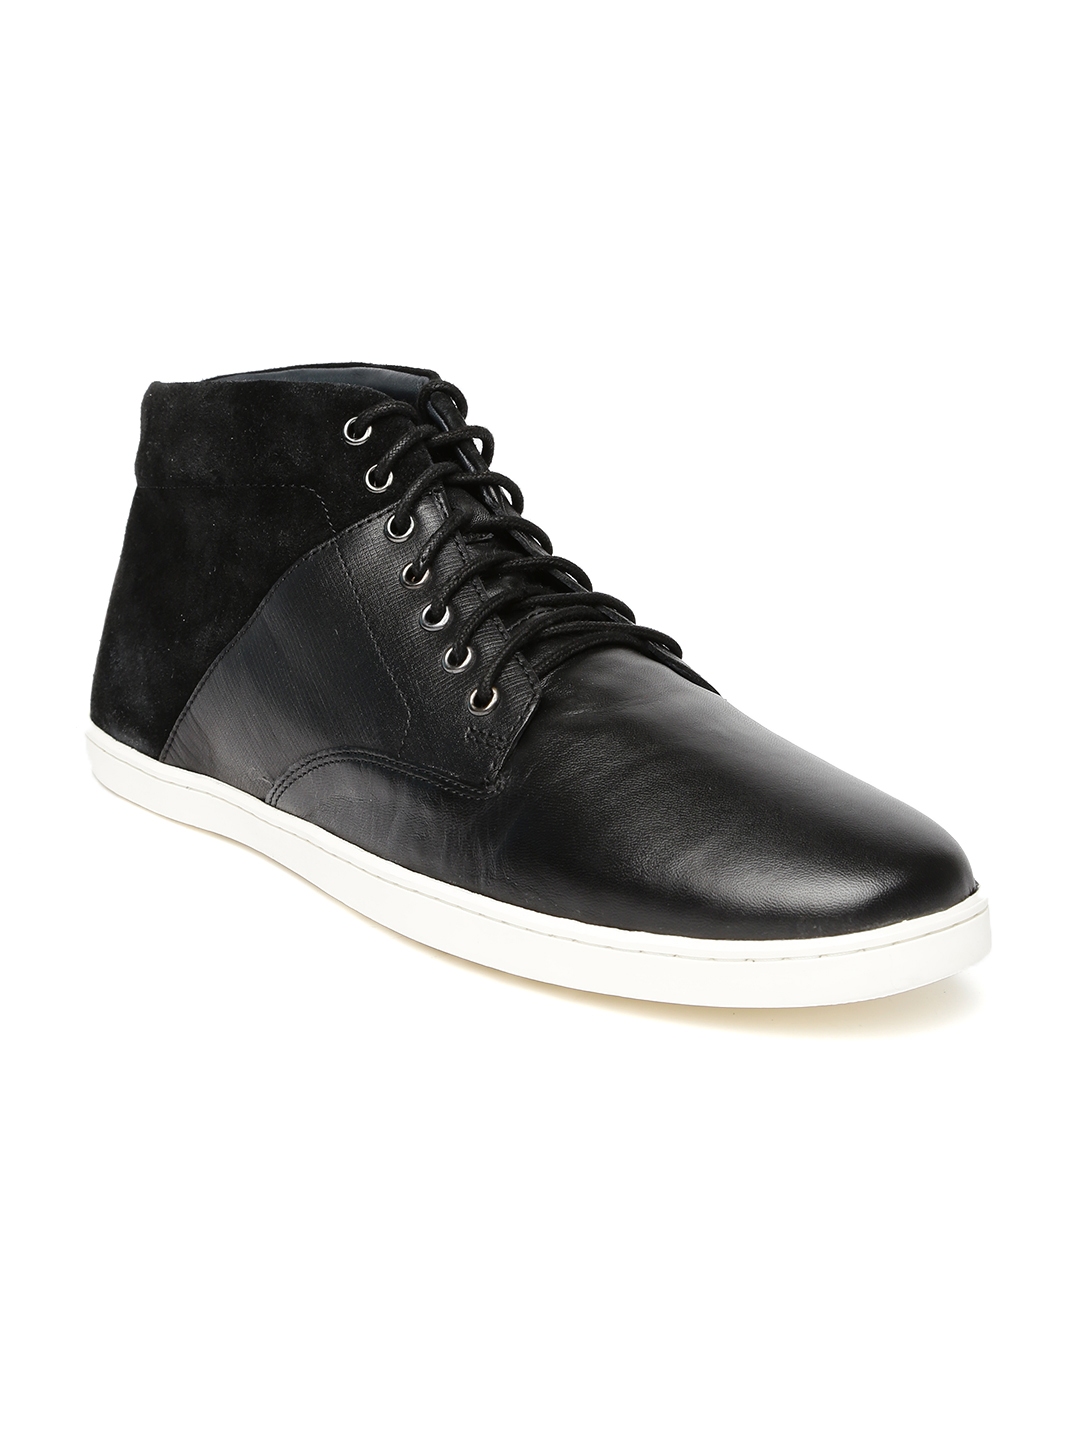 Buy LOUIS PHILIPPE Mens Leather Lace Up Sneakers